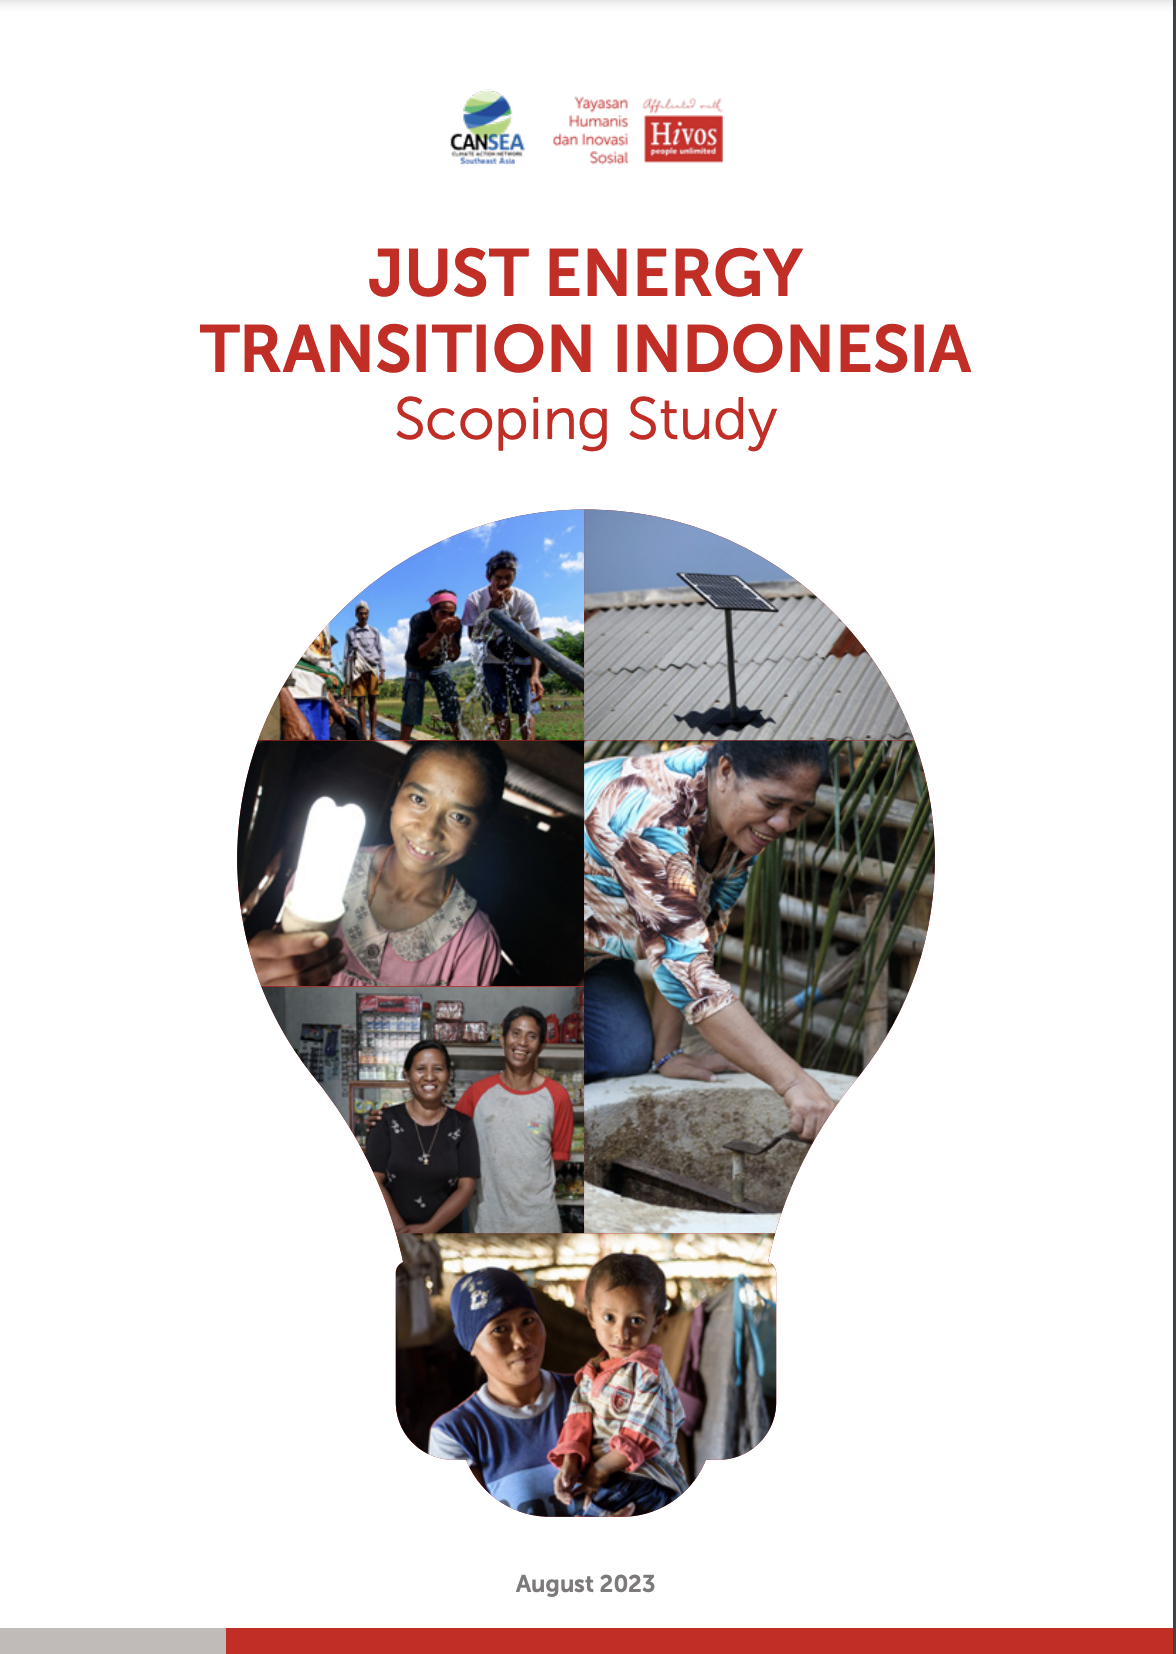 JUST ENERGY TRANSITION INDONESIA Scoping Study